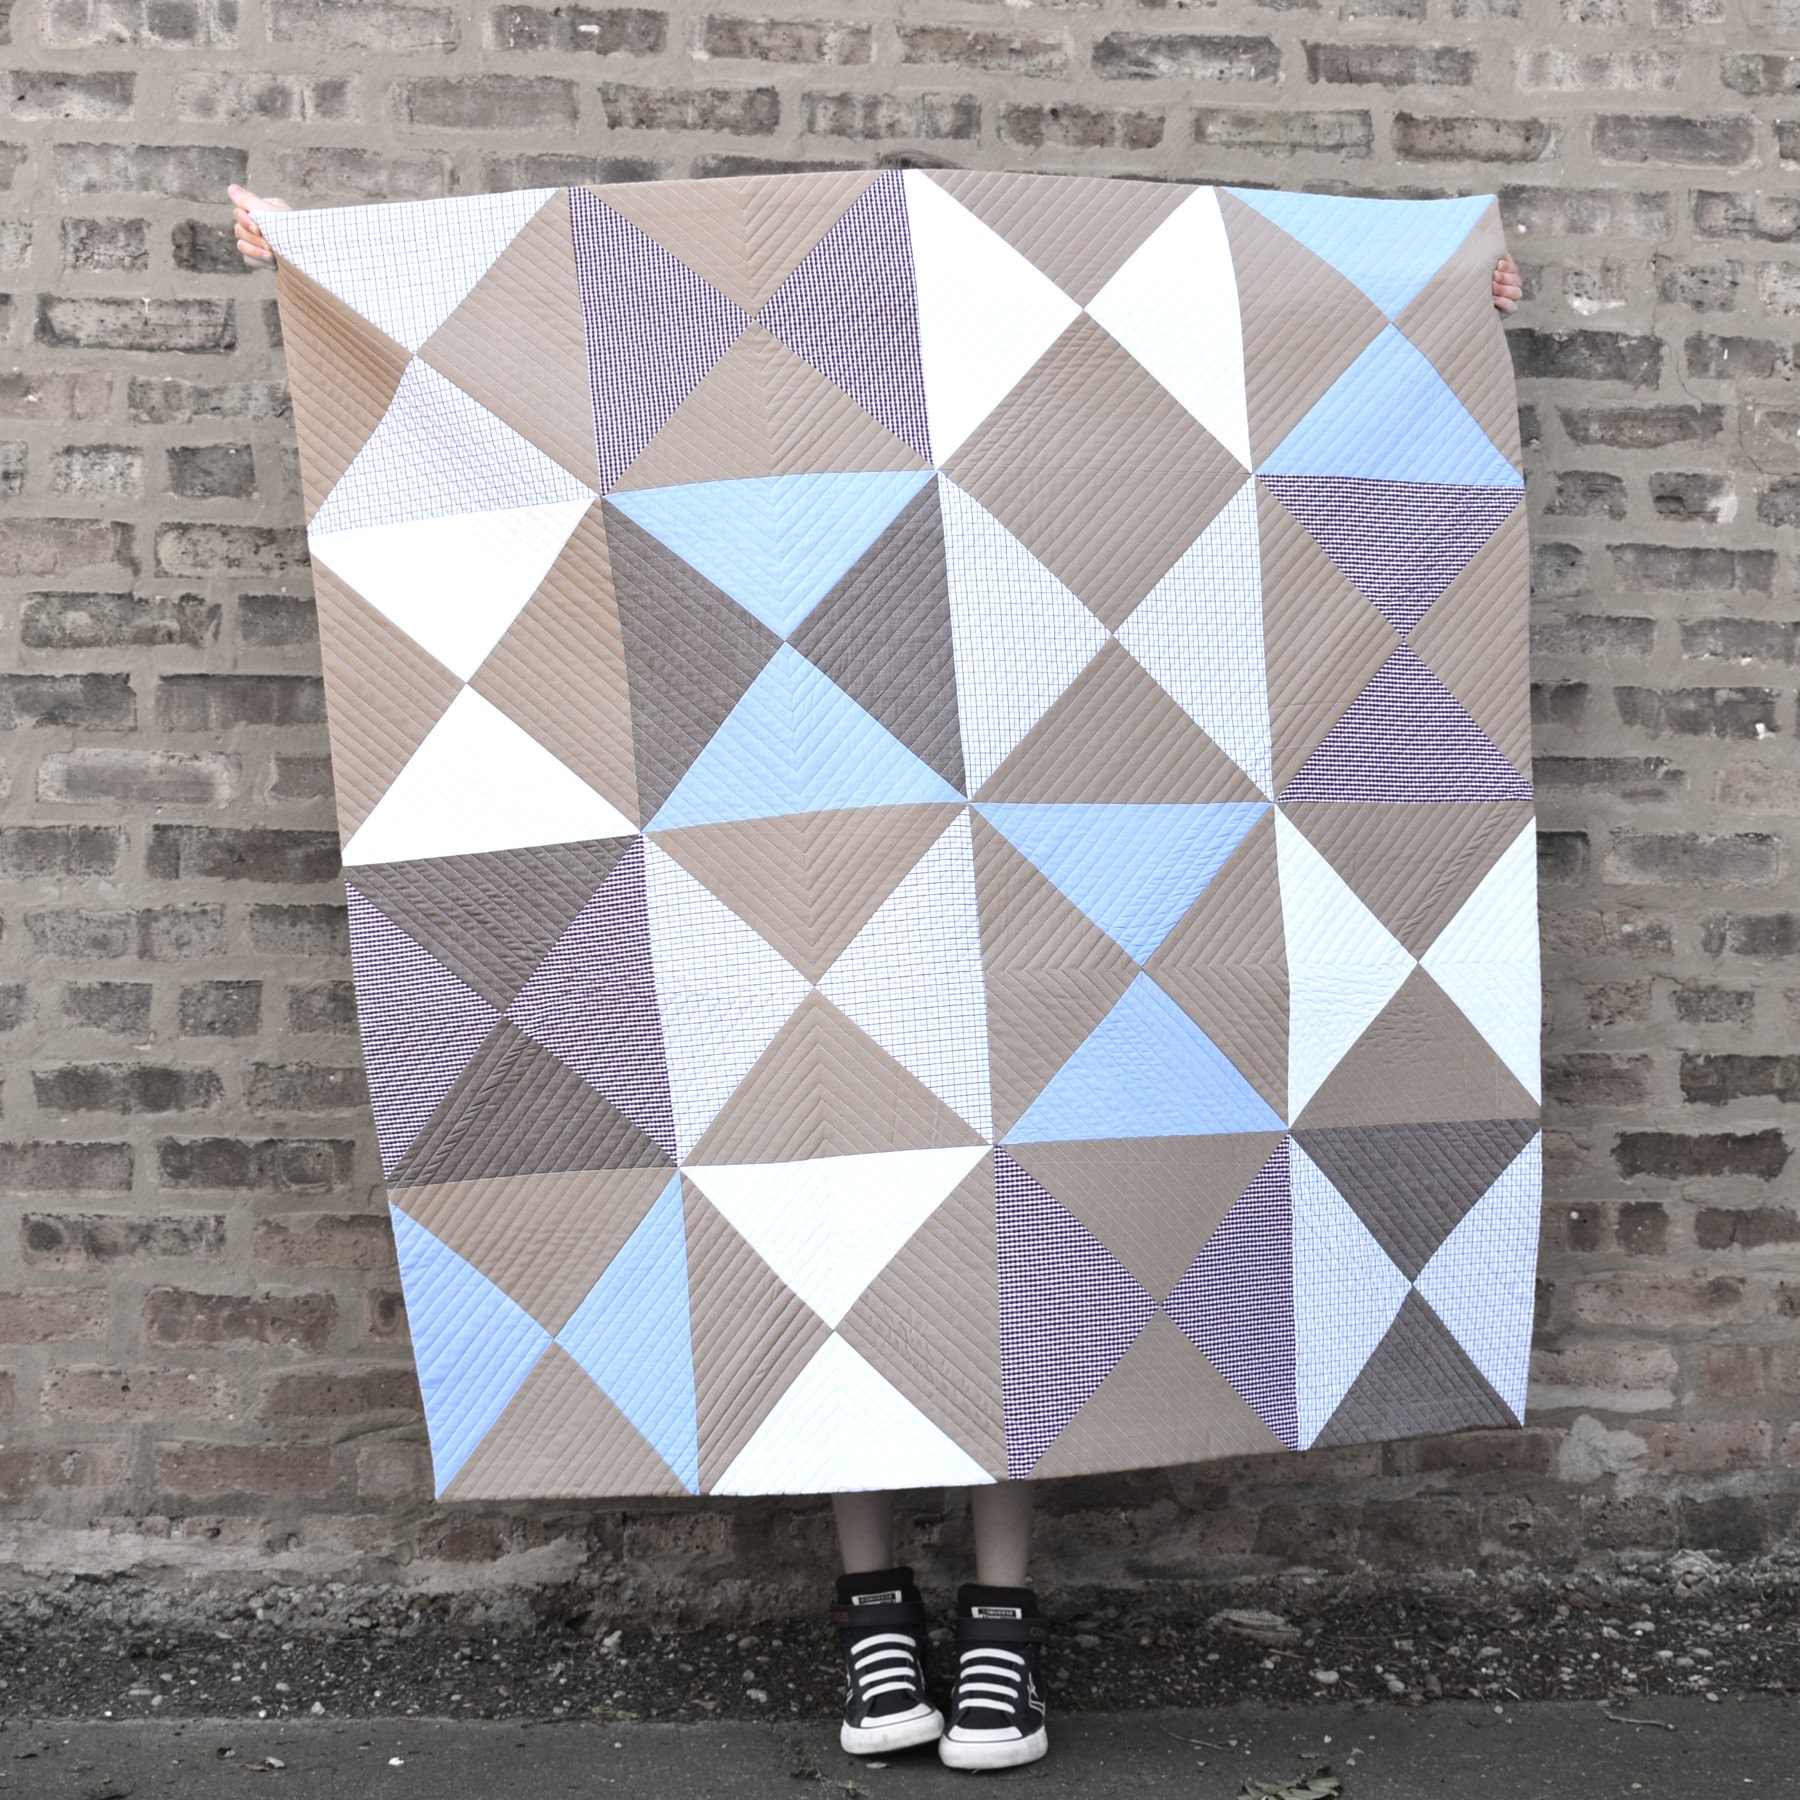 How to make a memory quilt: preparing the materials